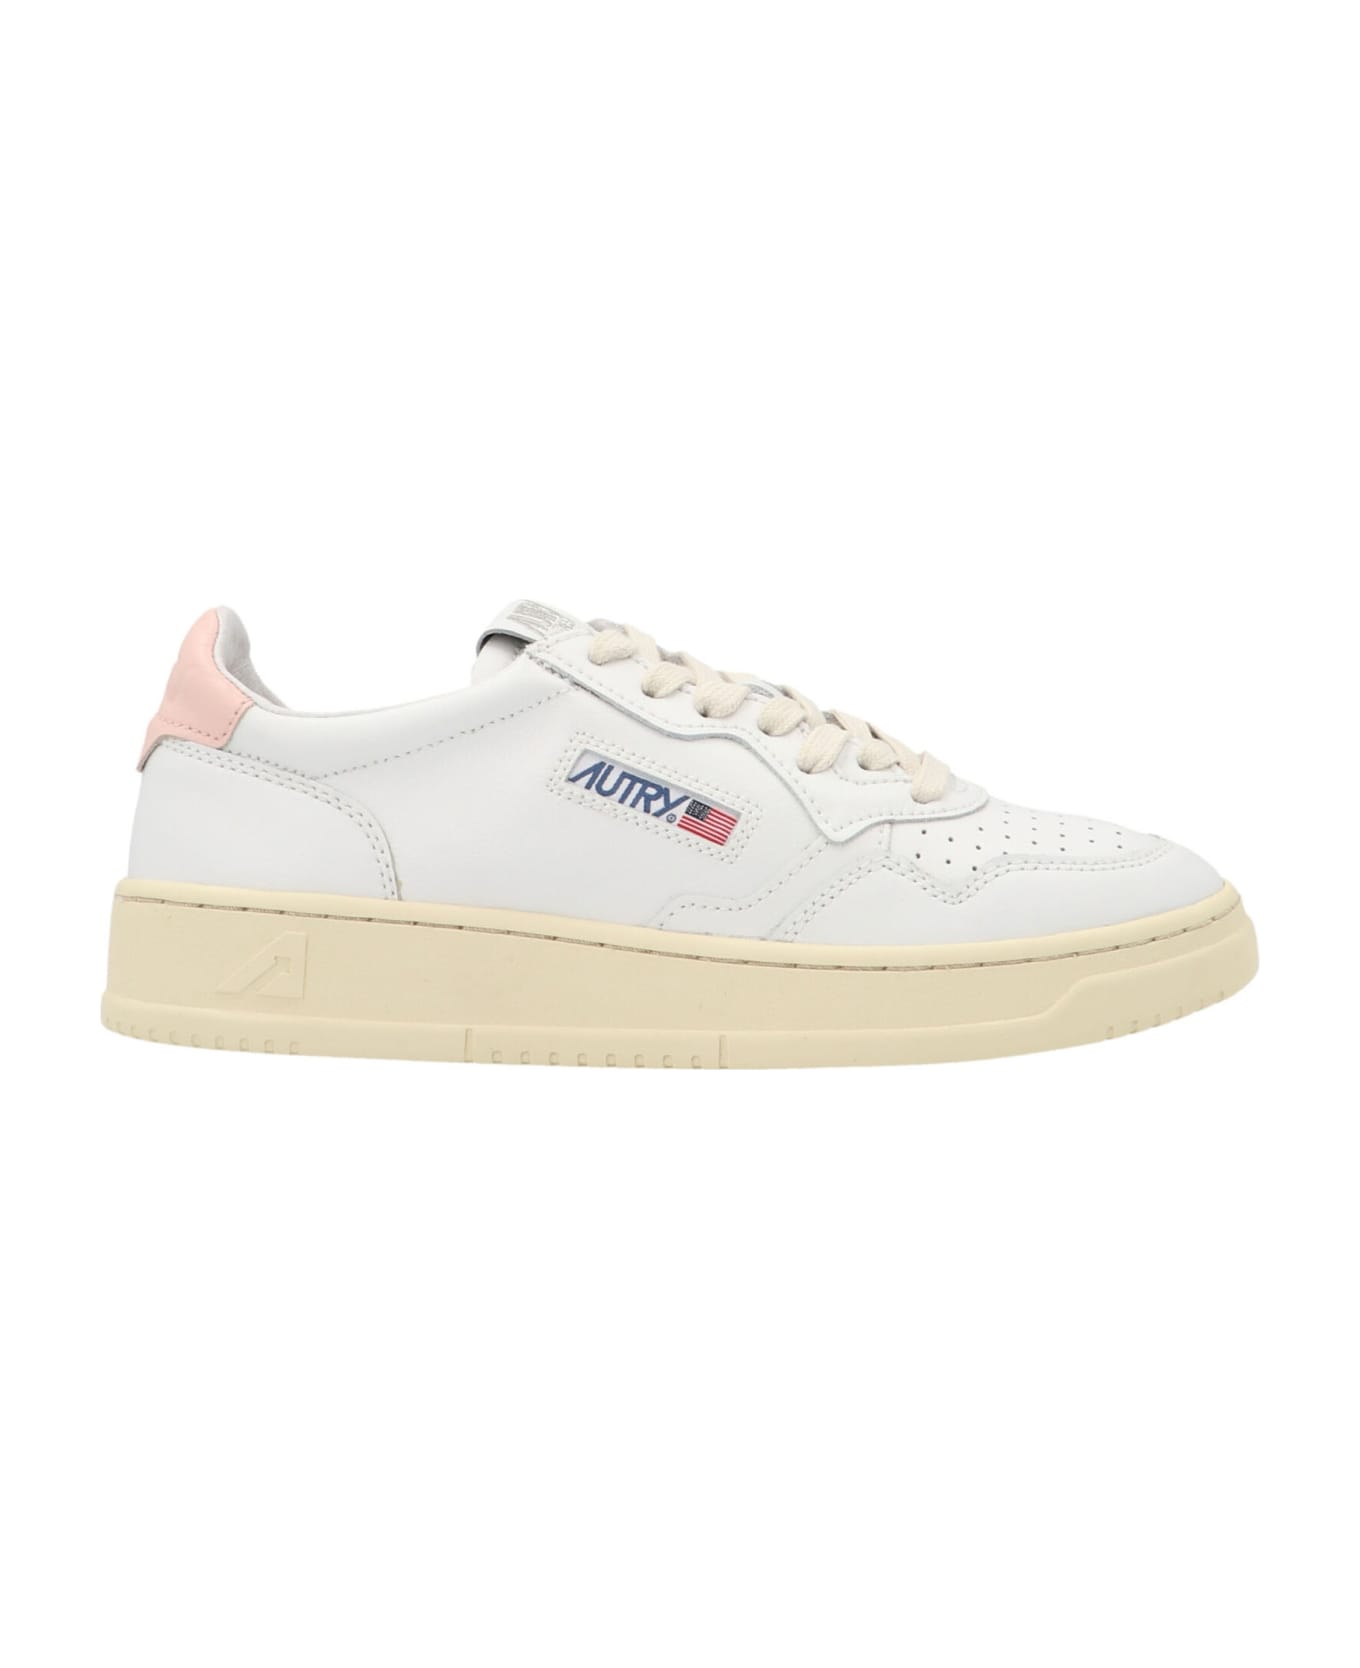 Autry 'autry 01' Sneakers - Pink